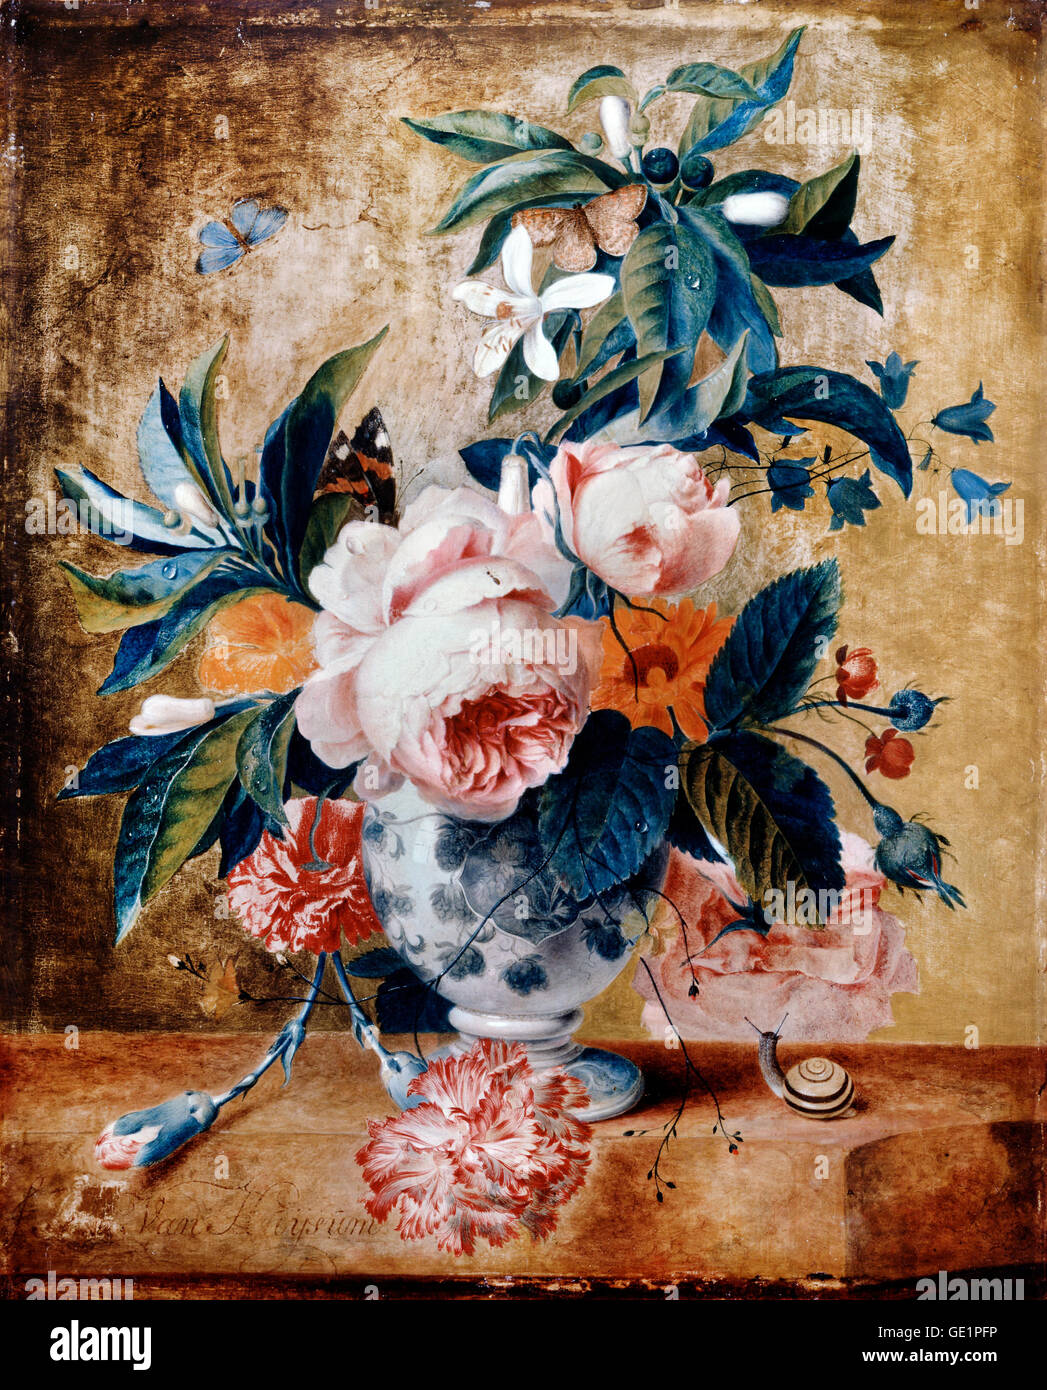 Jan van Huysum, A Delft Vase with Flowers. Circa 1730. Oil on panel. Dulwich Picture Gallery, London, England. Stock Photo